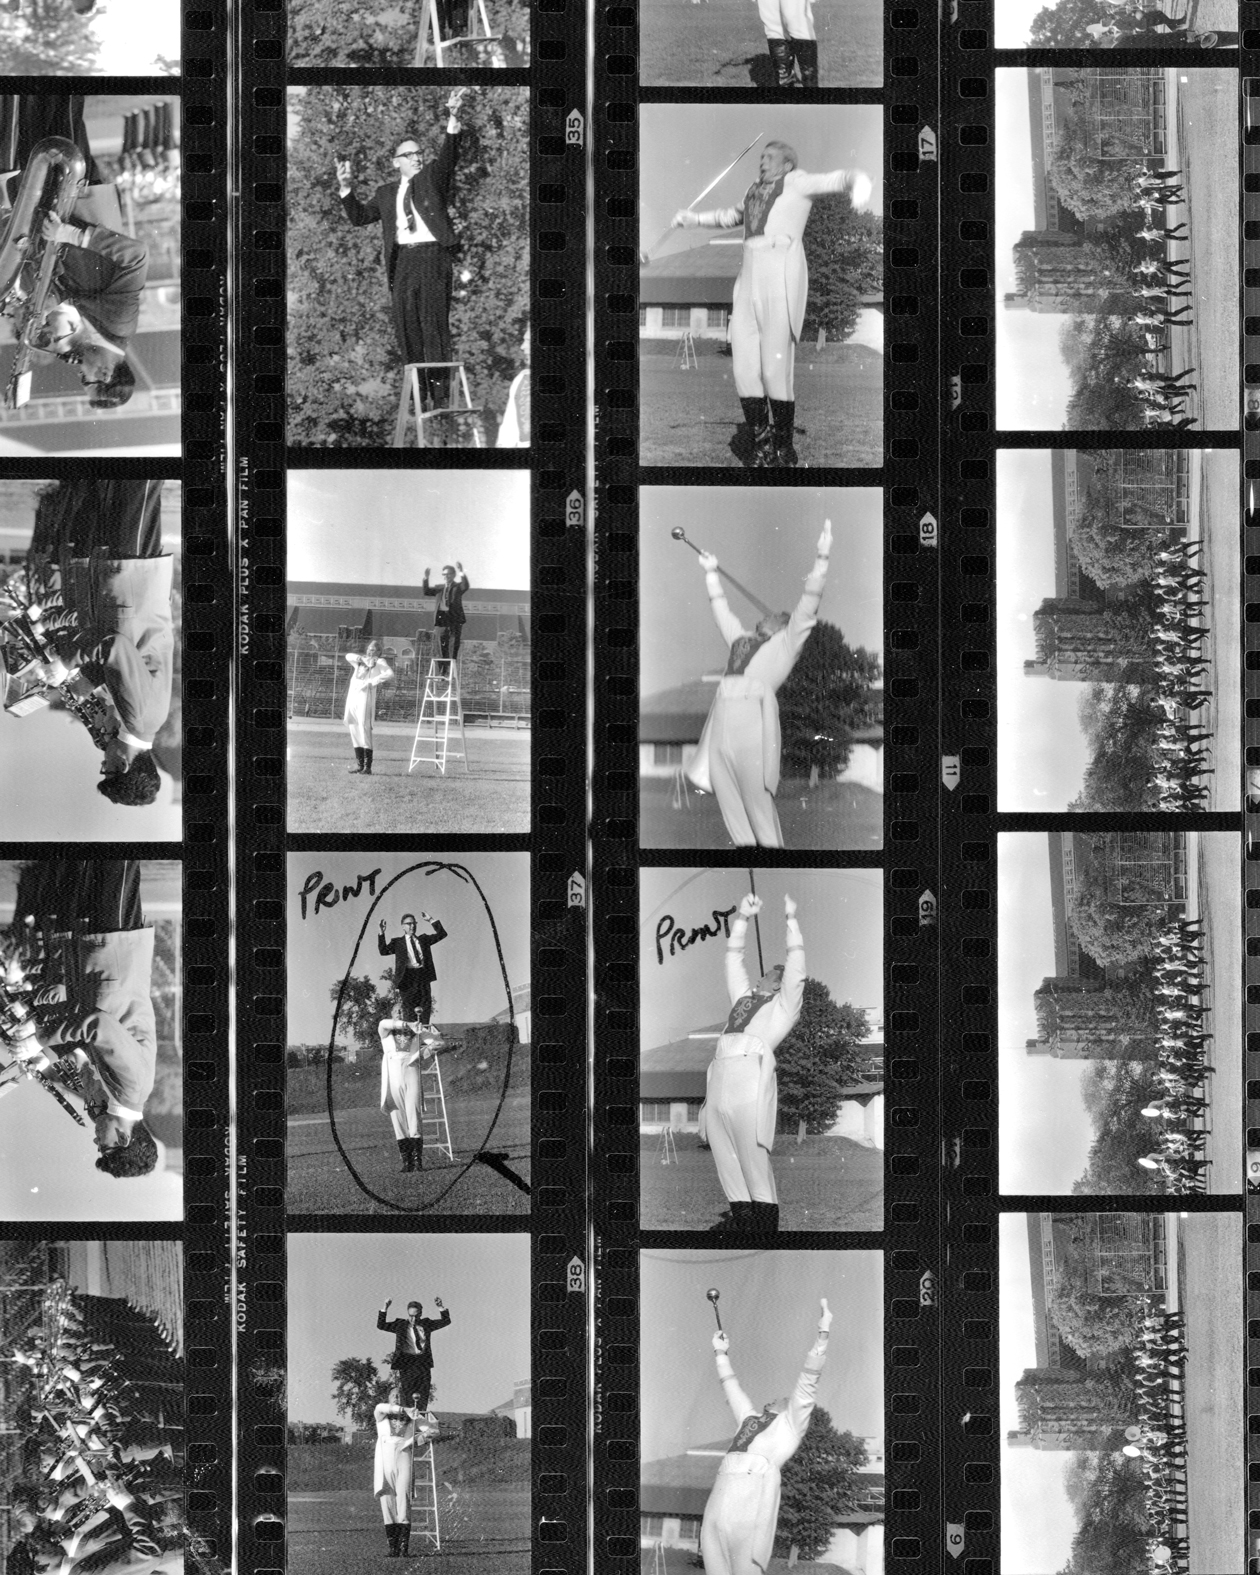 Marked selections on a contact sheet show chosen images from a Big Red Band performance